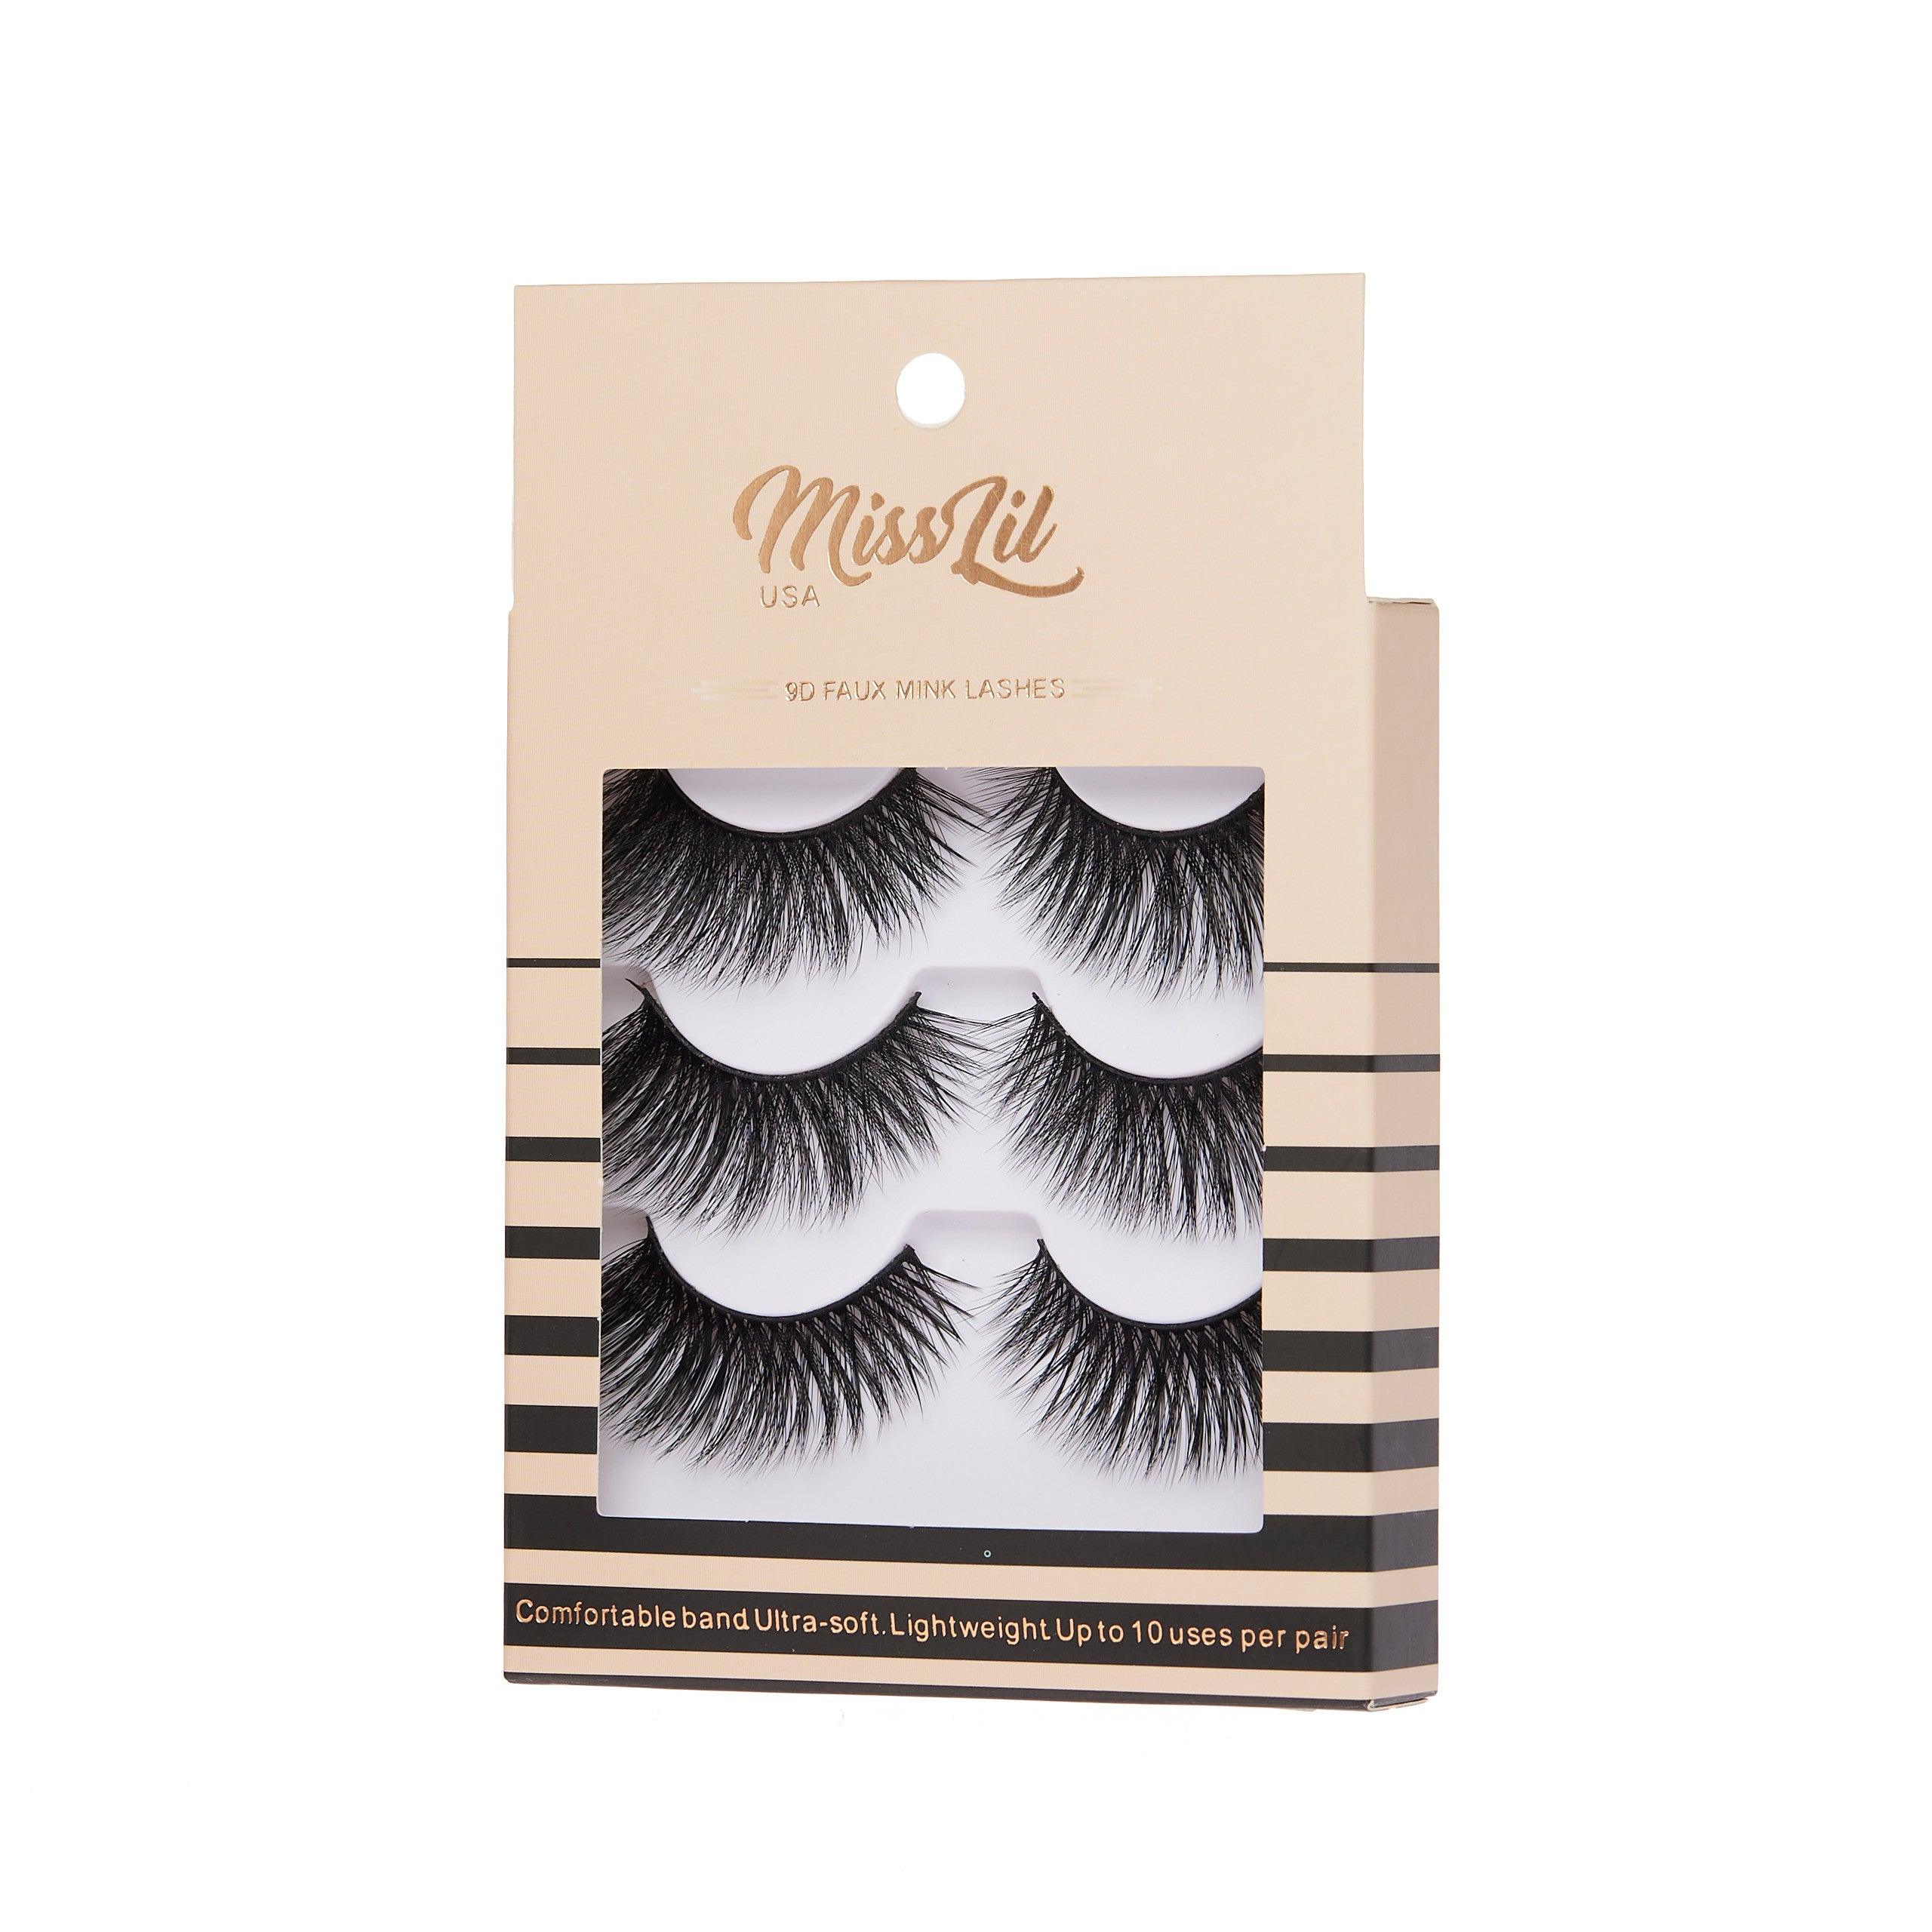 3-Pair Faux 9D Mink Eyelashes - Luxury Collection #6 - Pack of 3 - Miss Lil USA